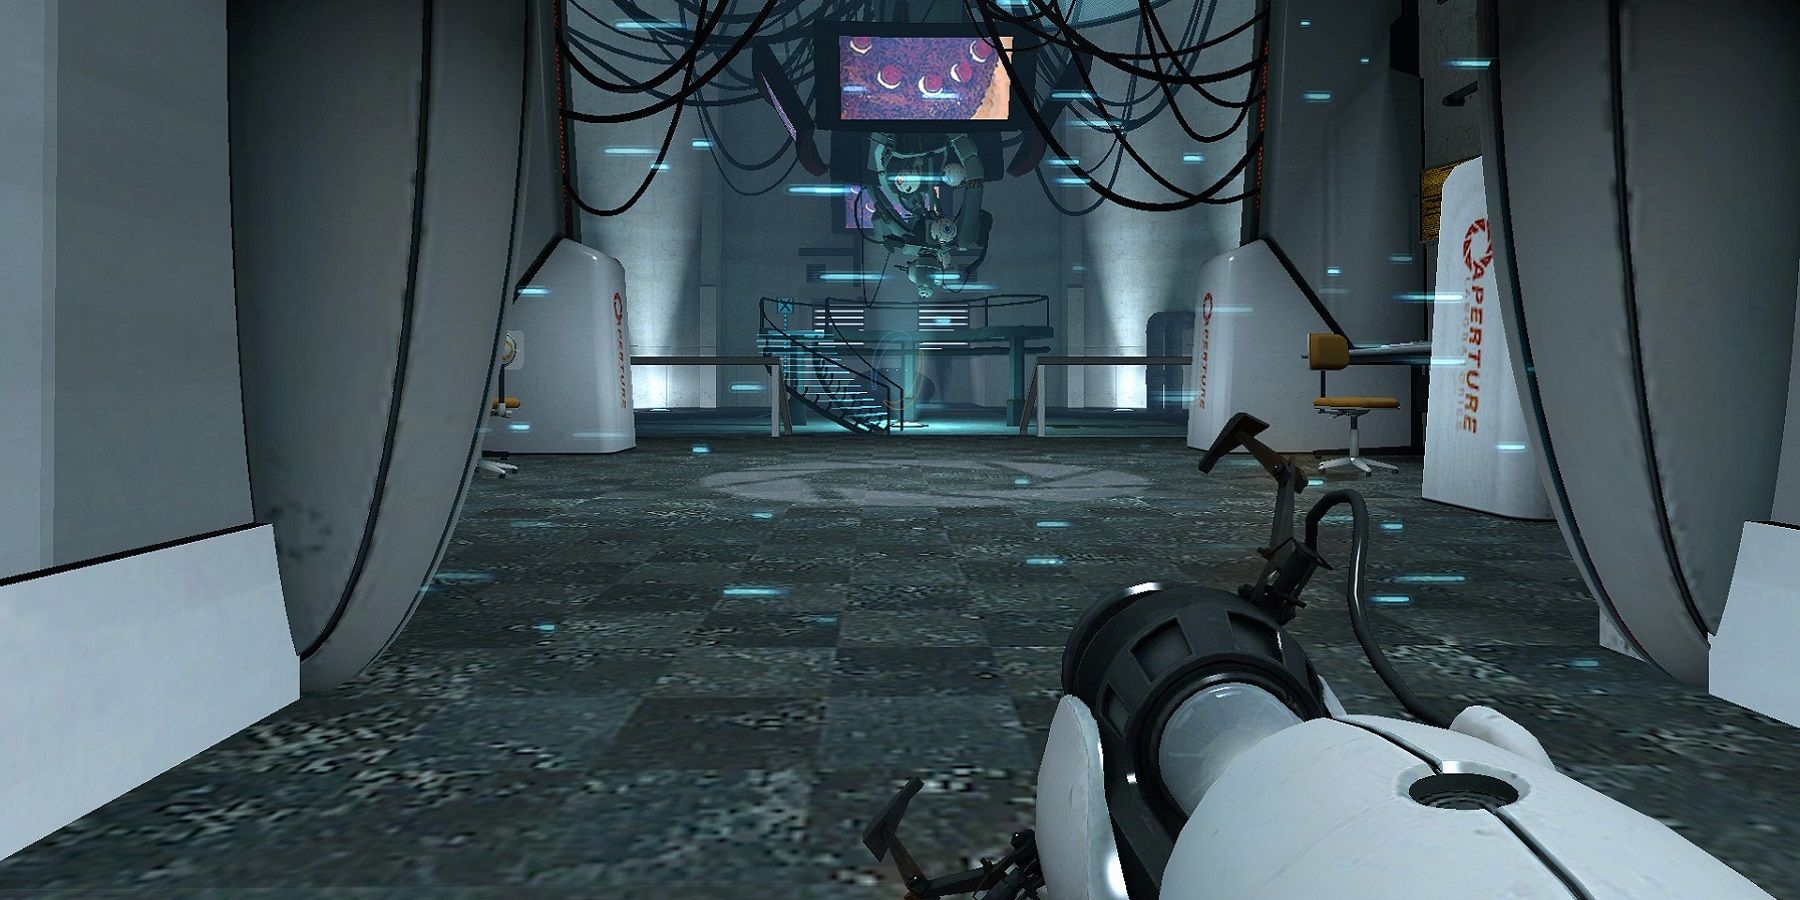 Screenshot from Portal showing the player entering GLaDOS's chamber.